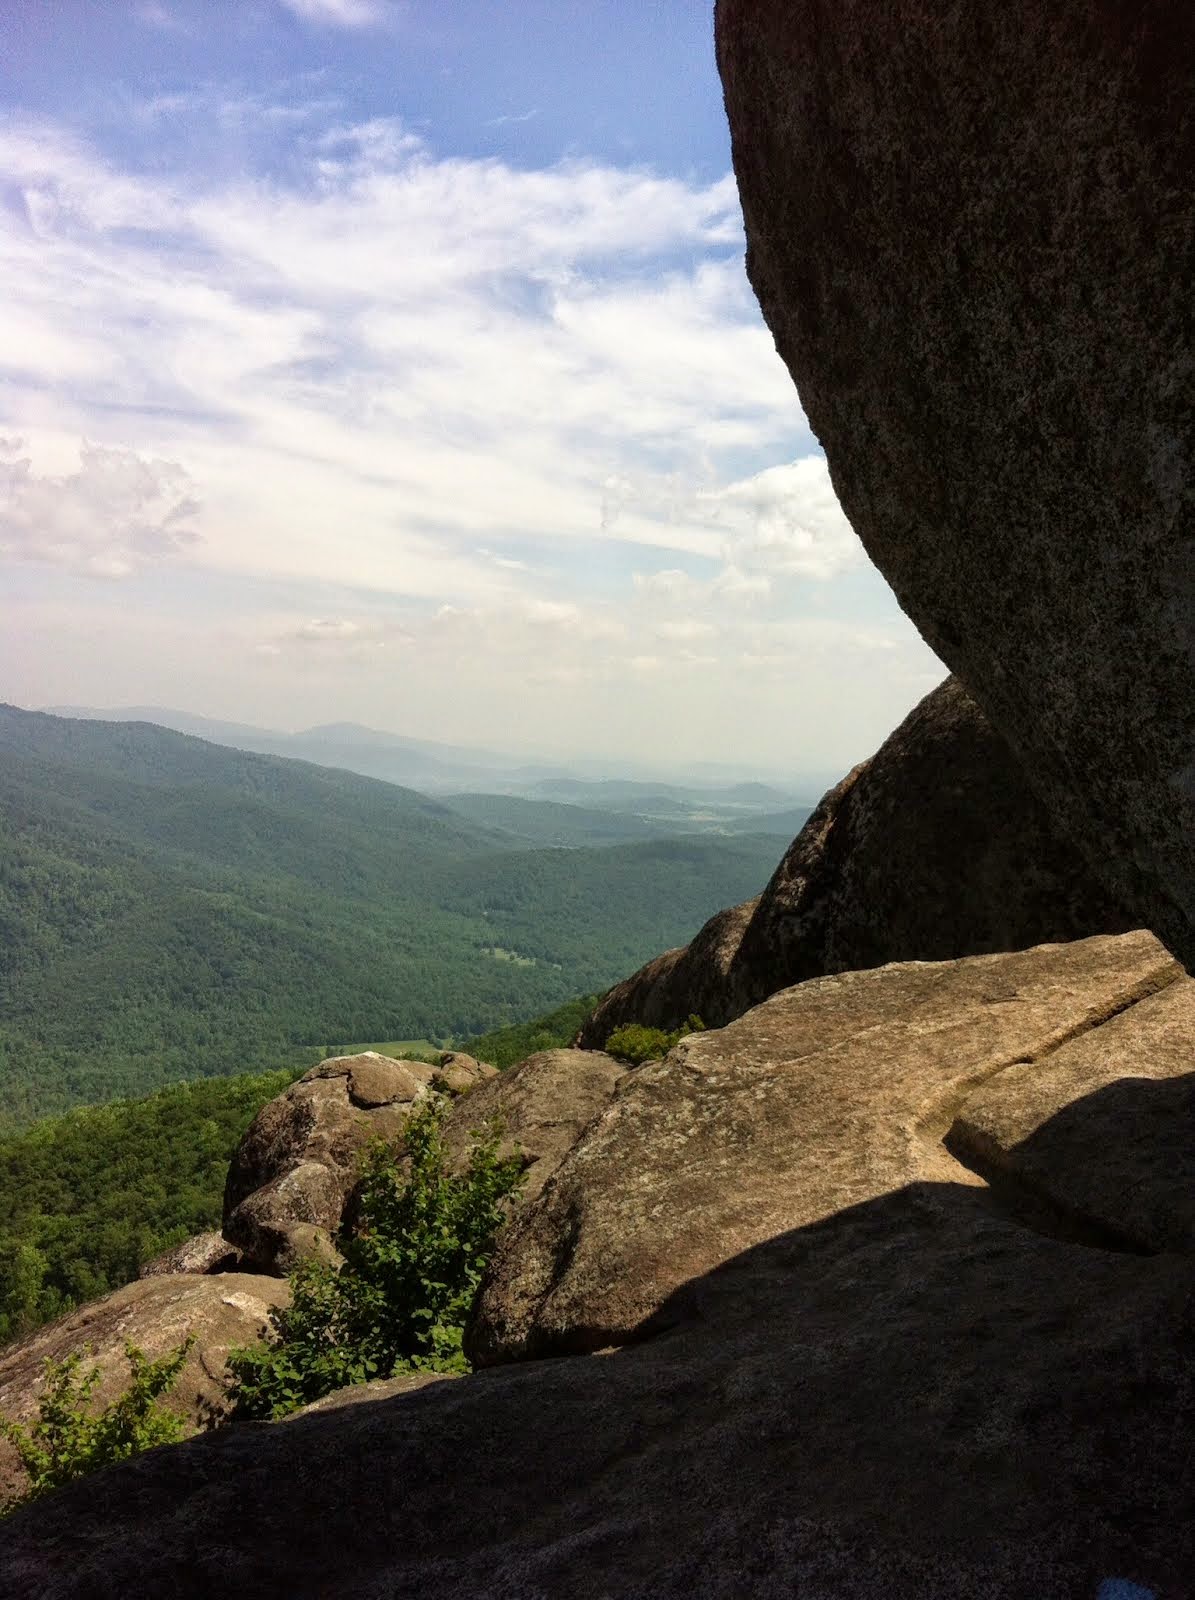 View from the top of Old Rag